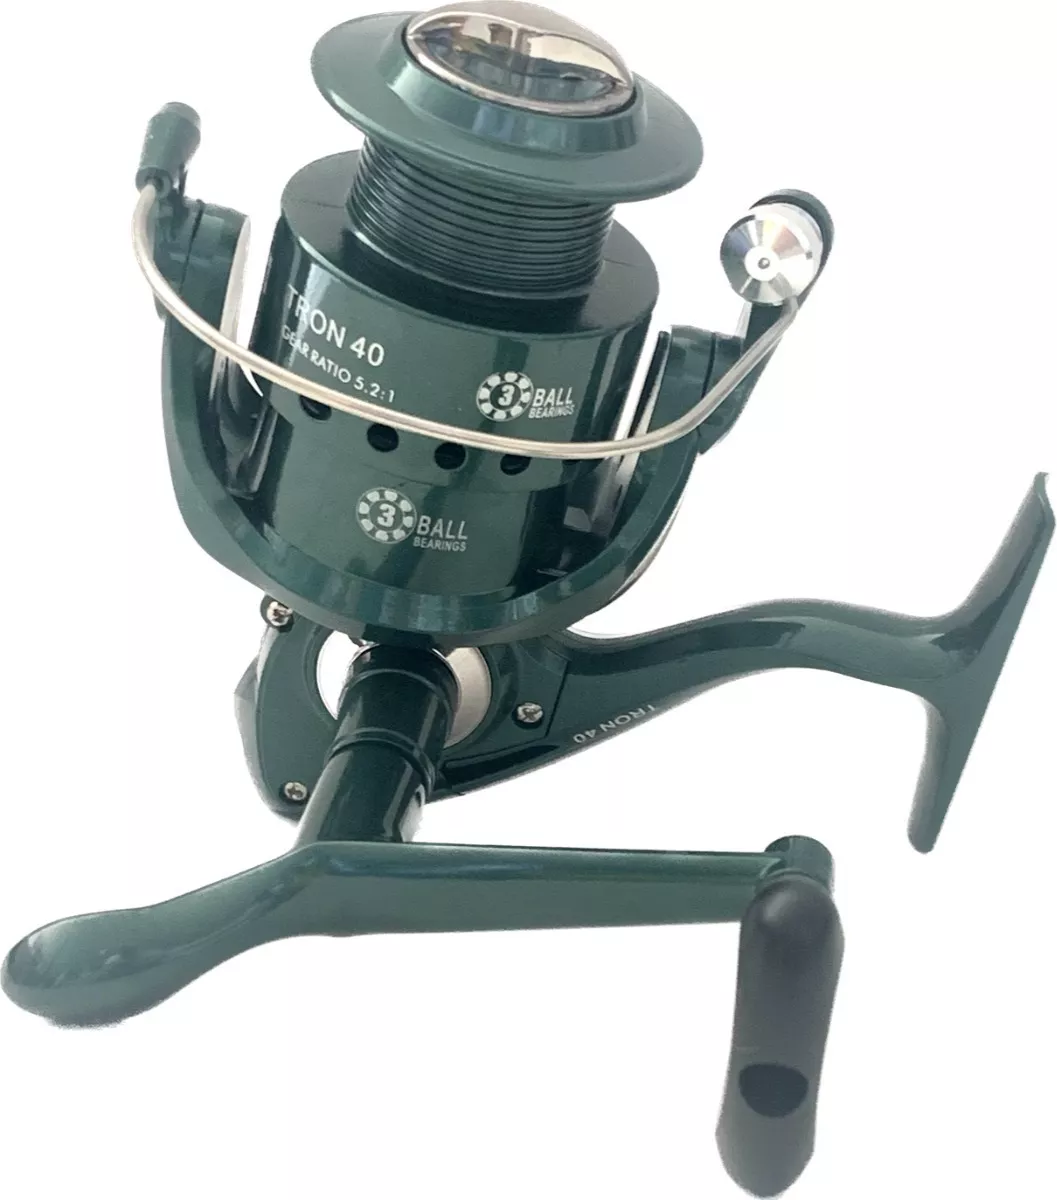 Reel Frontal Tech Tron 3 Rulemanes Pesca Pejerrey Spinning